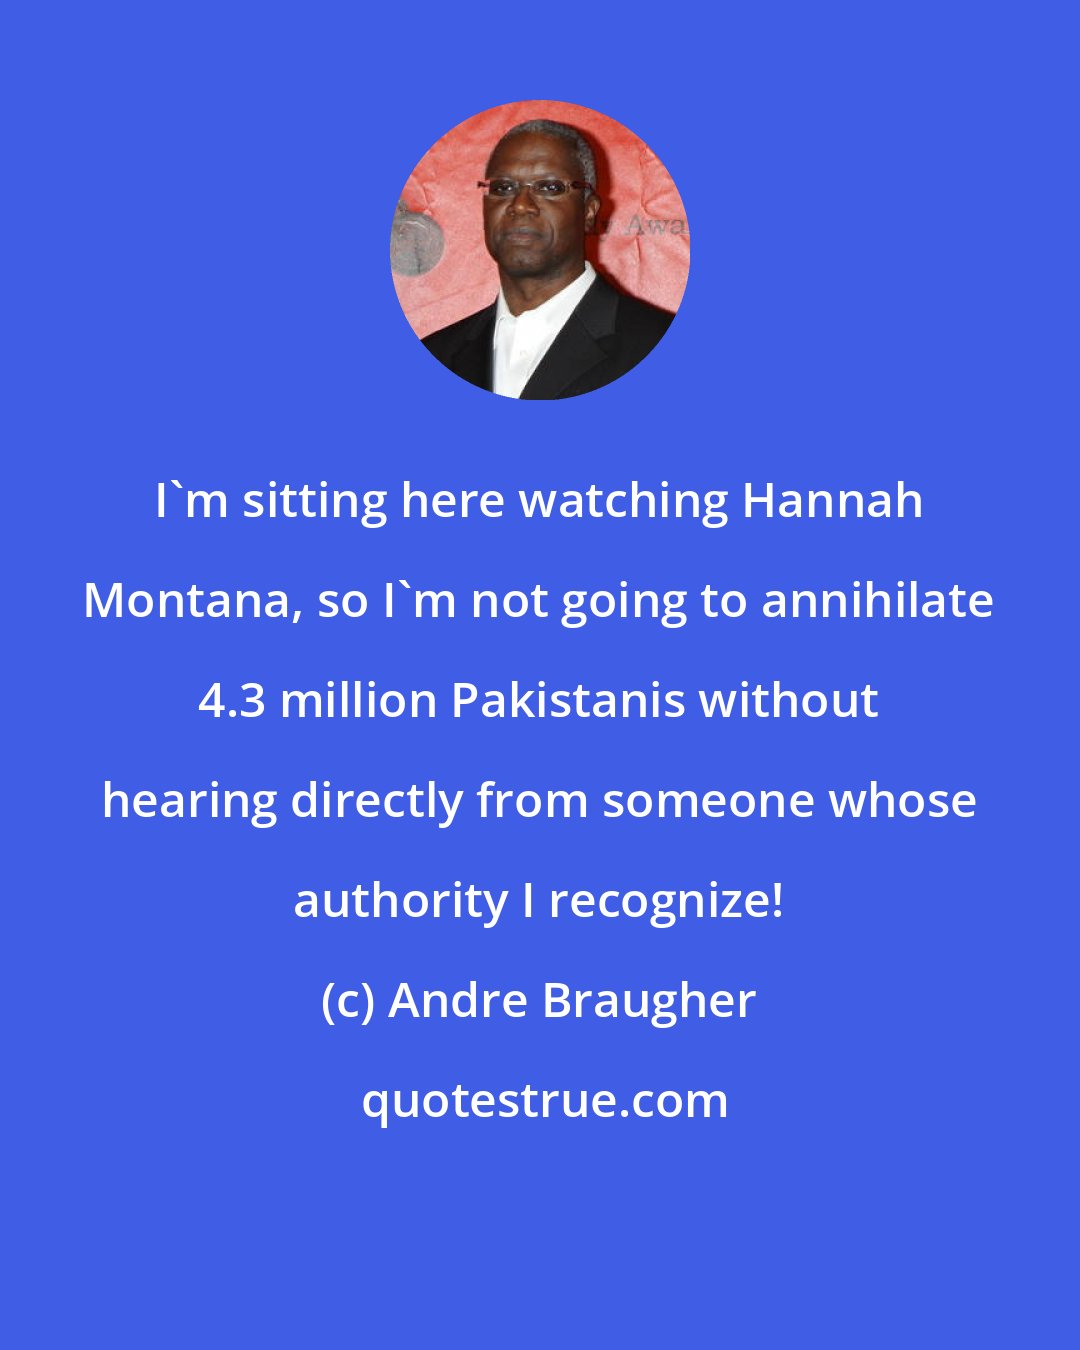 Andre Braugher: I'm sitting here watching Hannah Montana, so I'm not going to annihilate 4.3 million Pakistanis without hearing directly from someone whose authority I recognize!